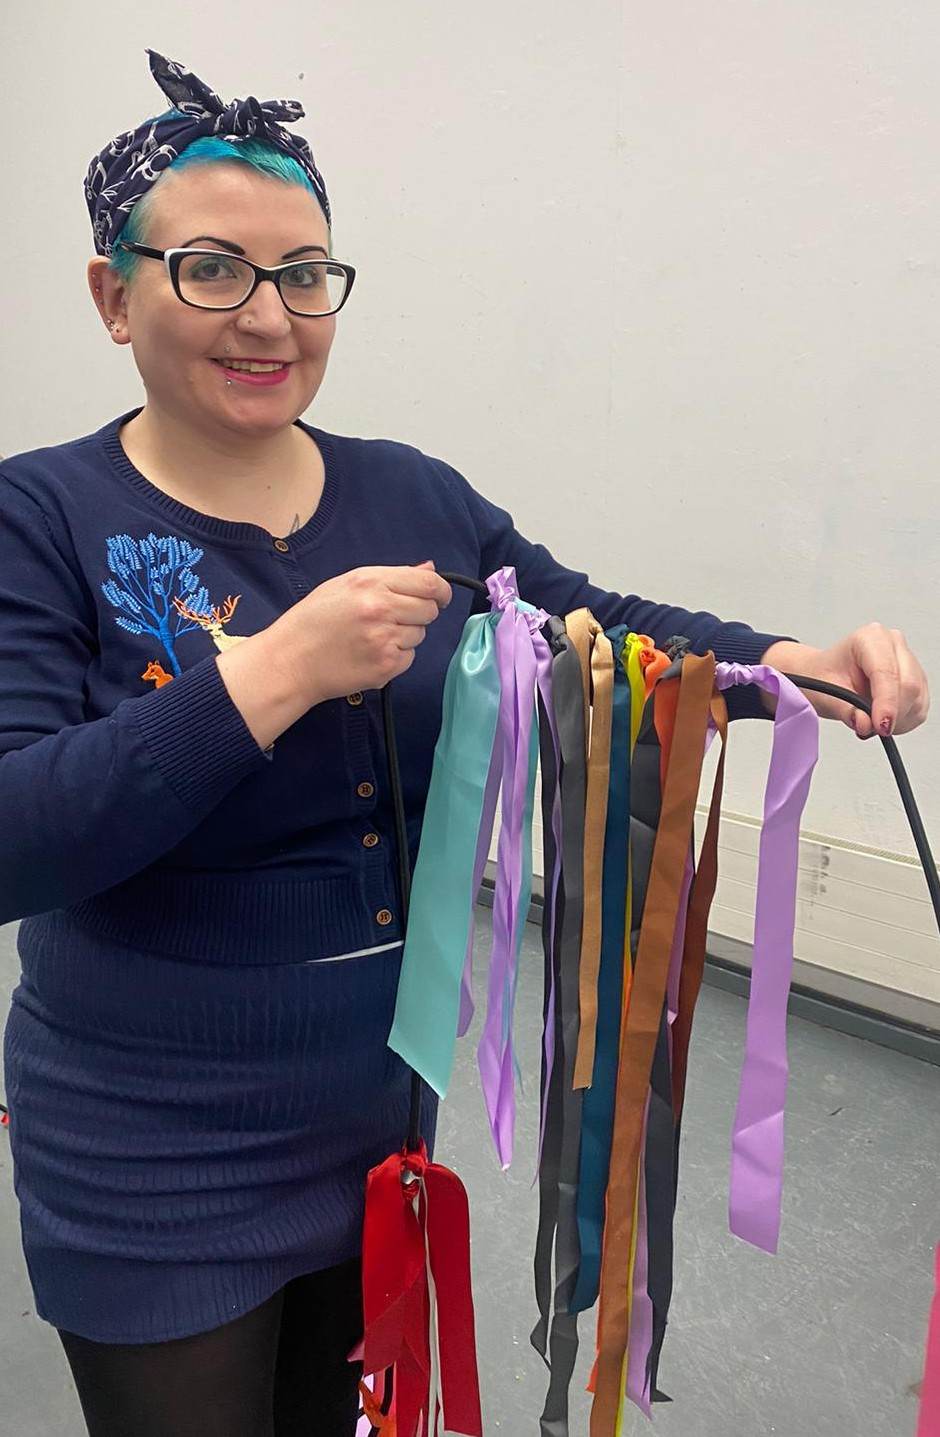 Gemma, a white woman with glasses, and blue hair that she has wrapped in a blue headscarf, holds up a string of ribbons and smiles at the camera.